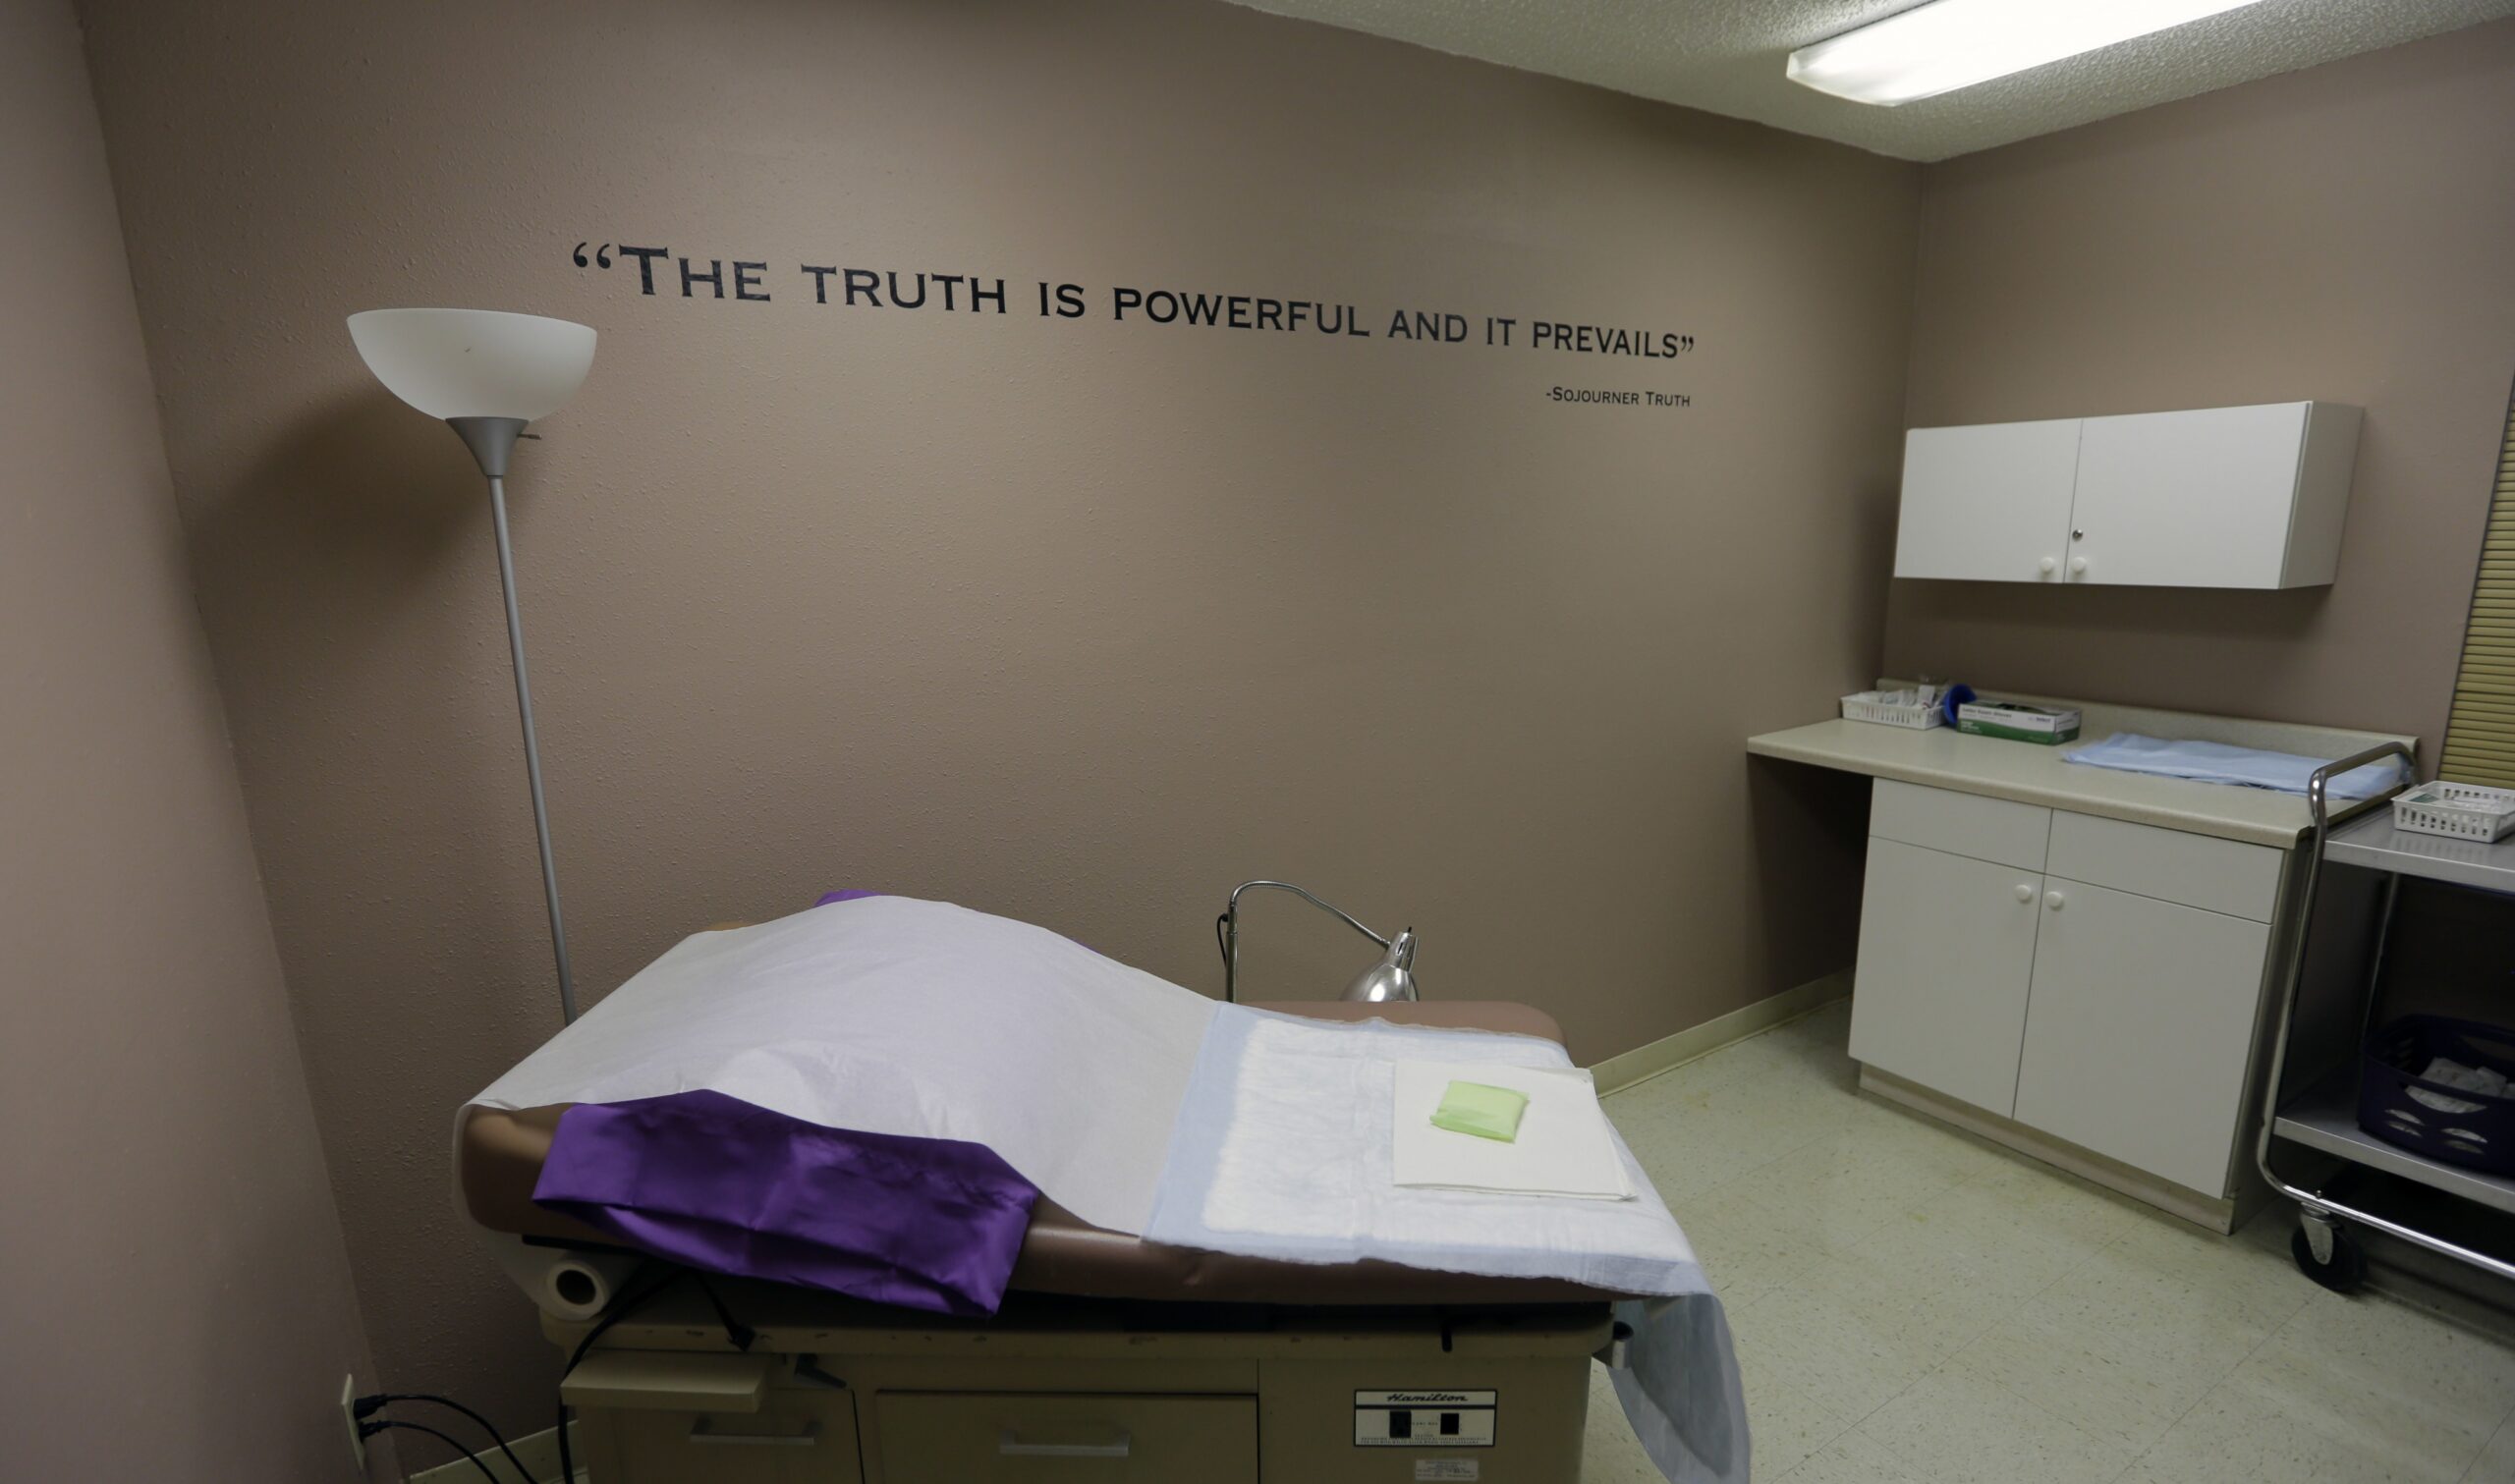 A room formally used as an examination room for abortions